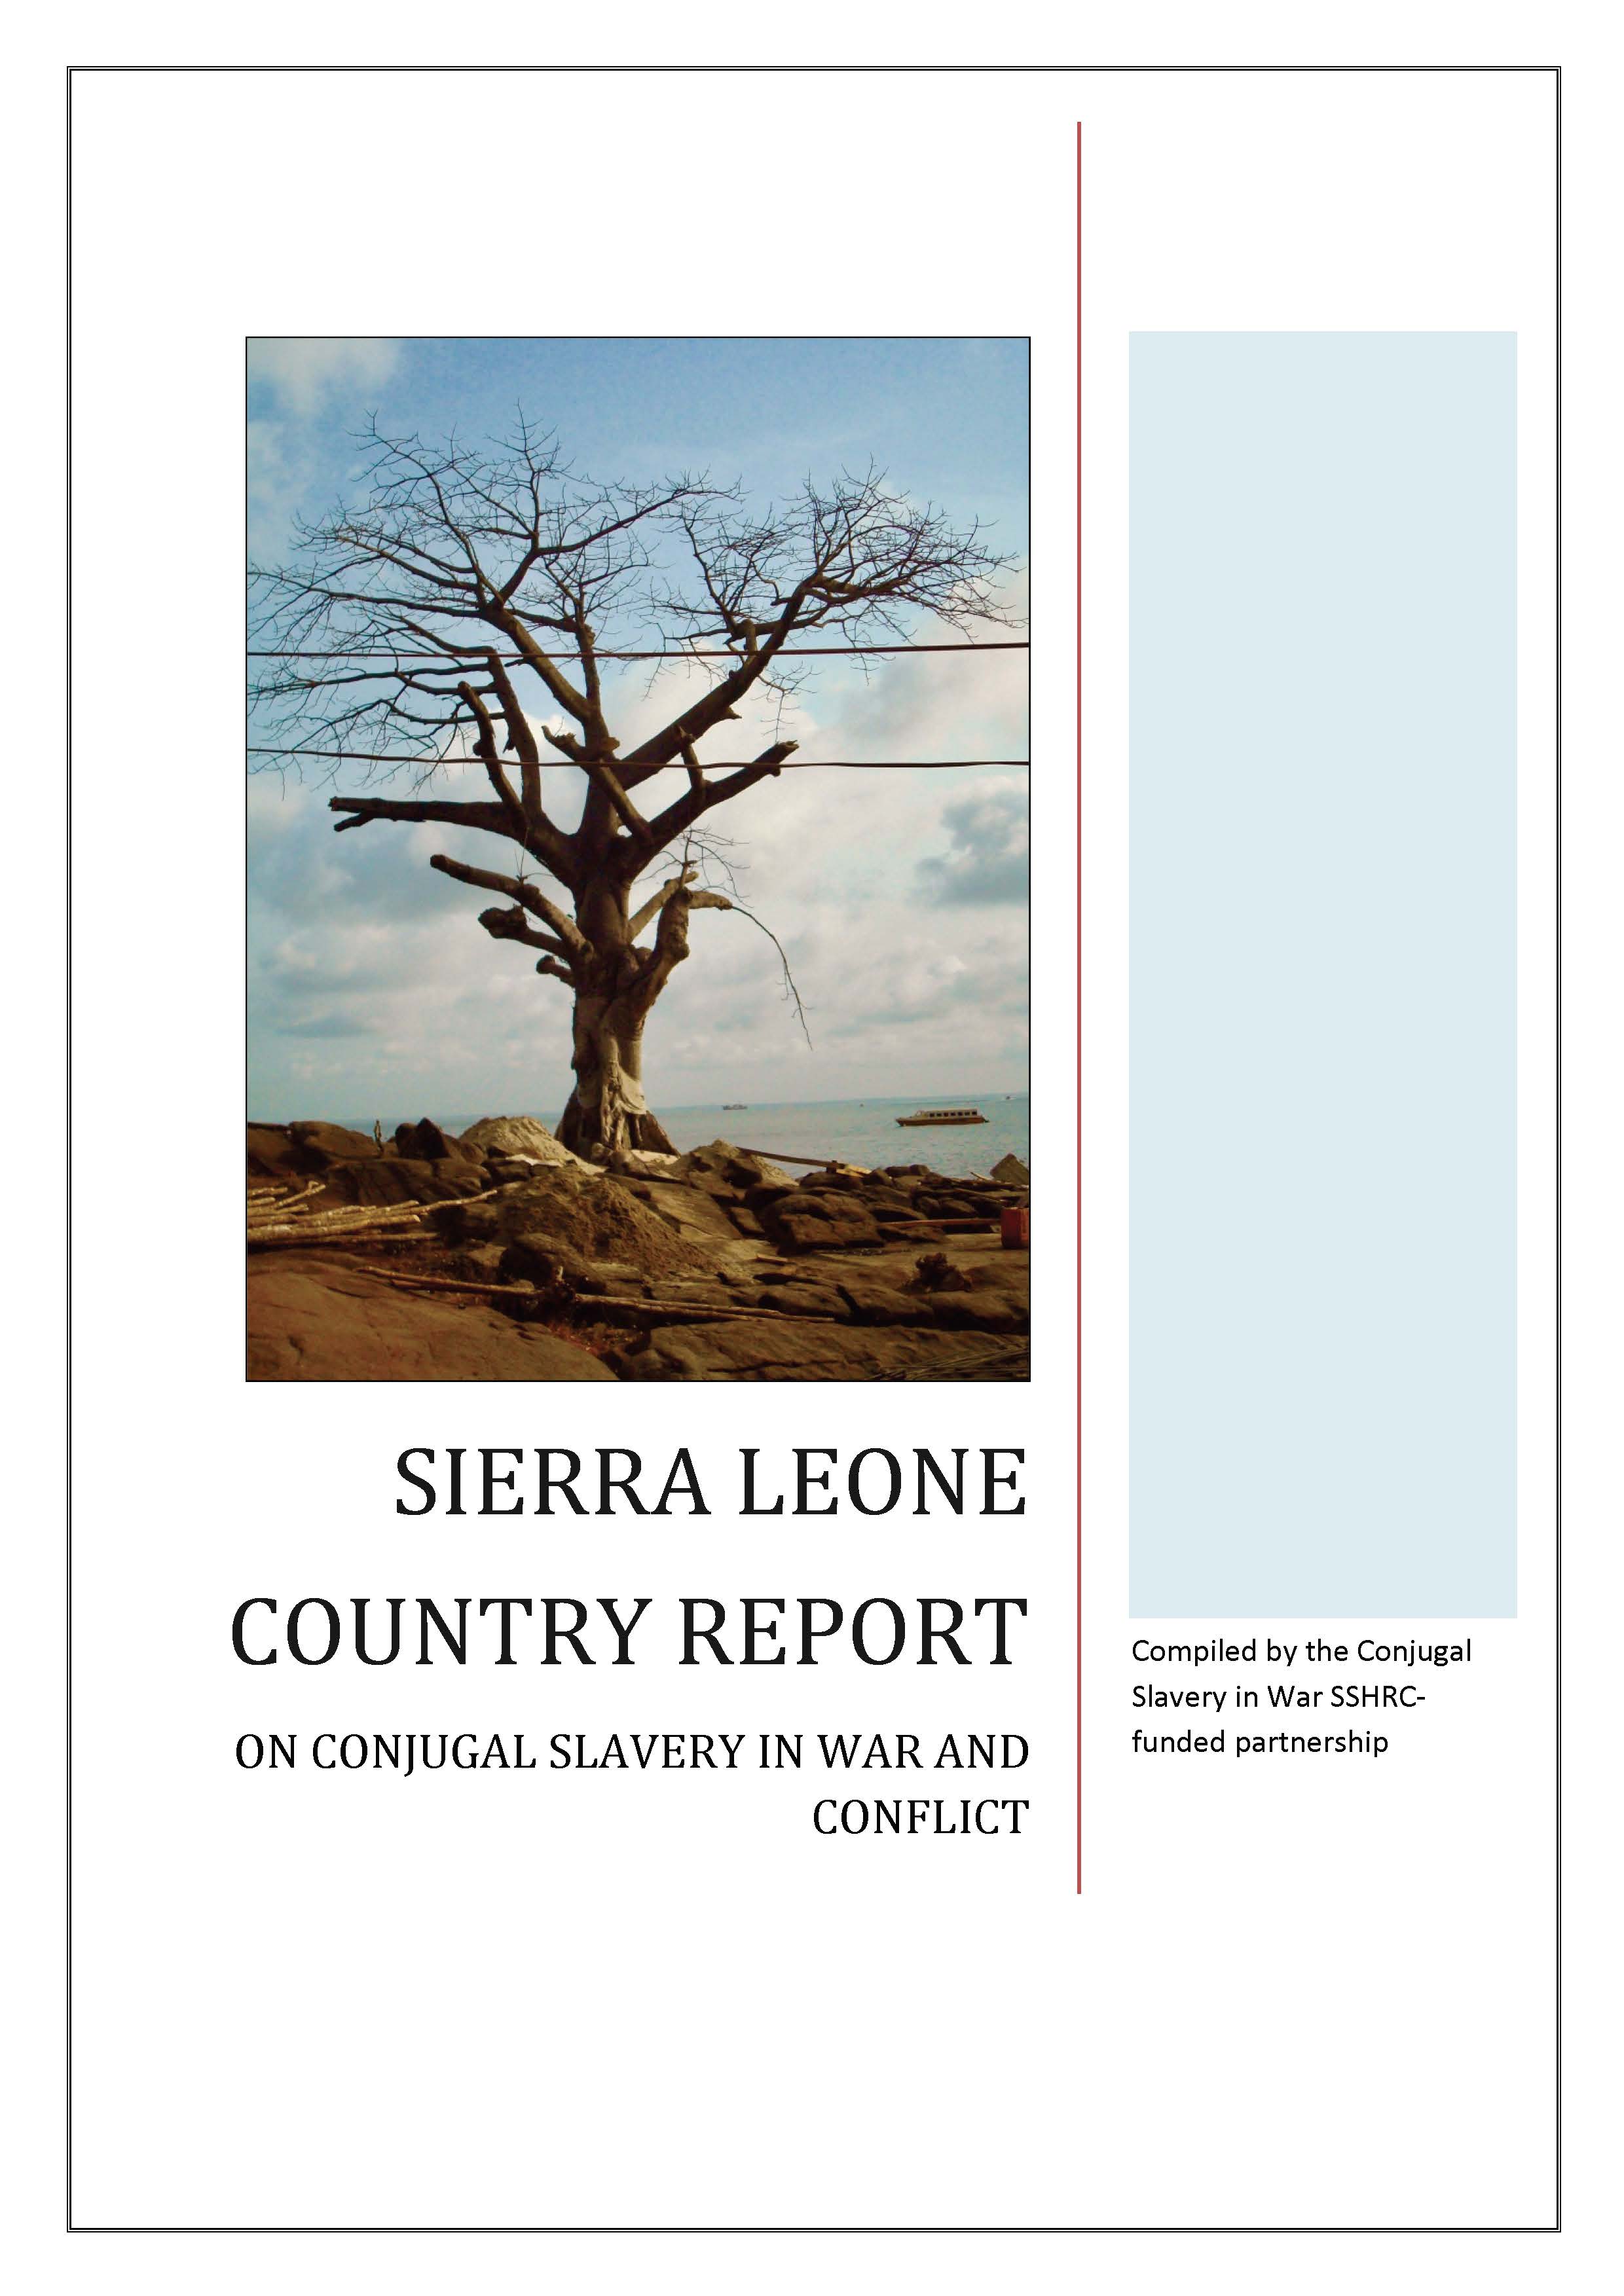 Sierra Leone Country Report on Conjugal Slavery in War and Conflict